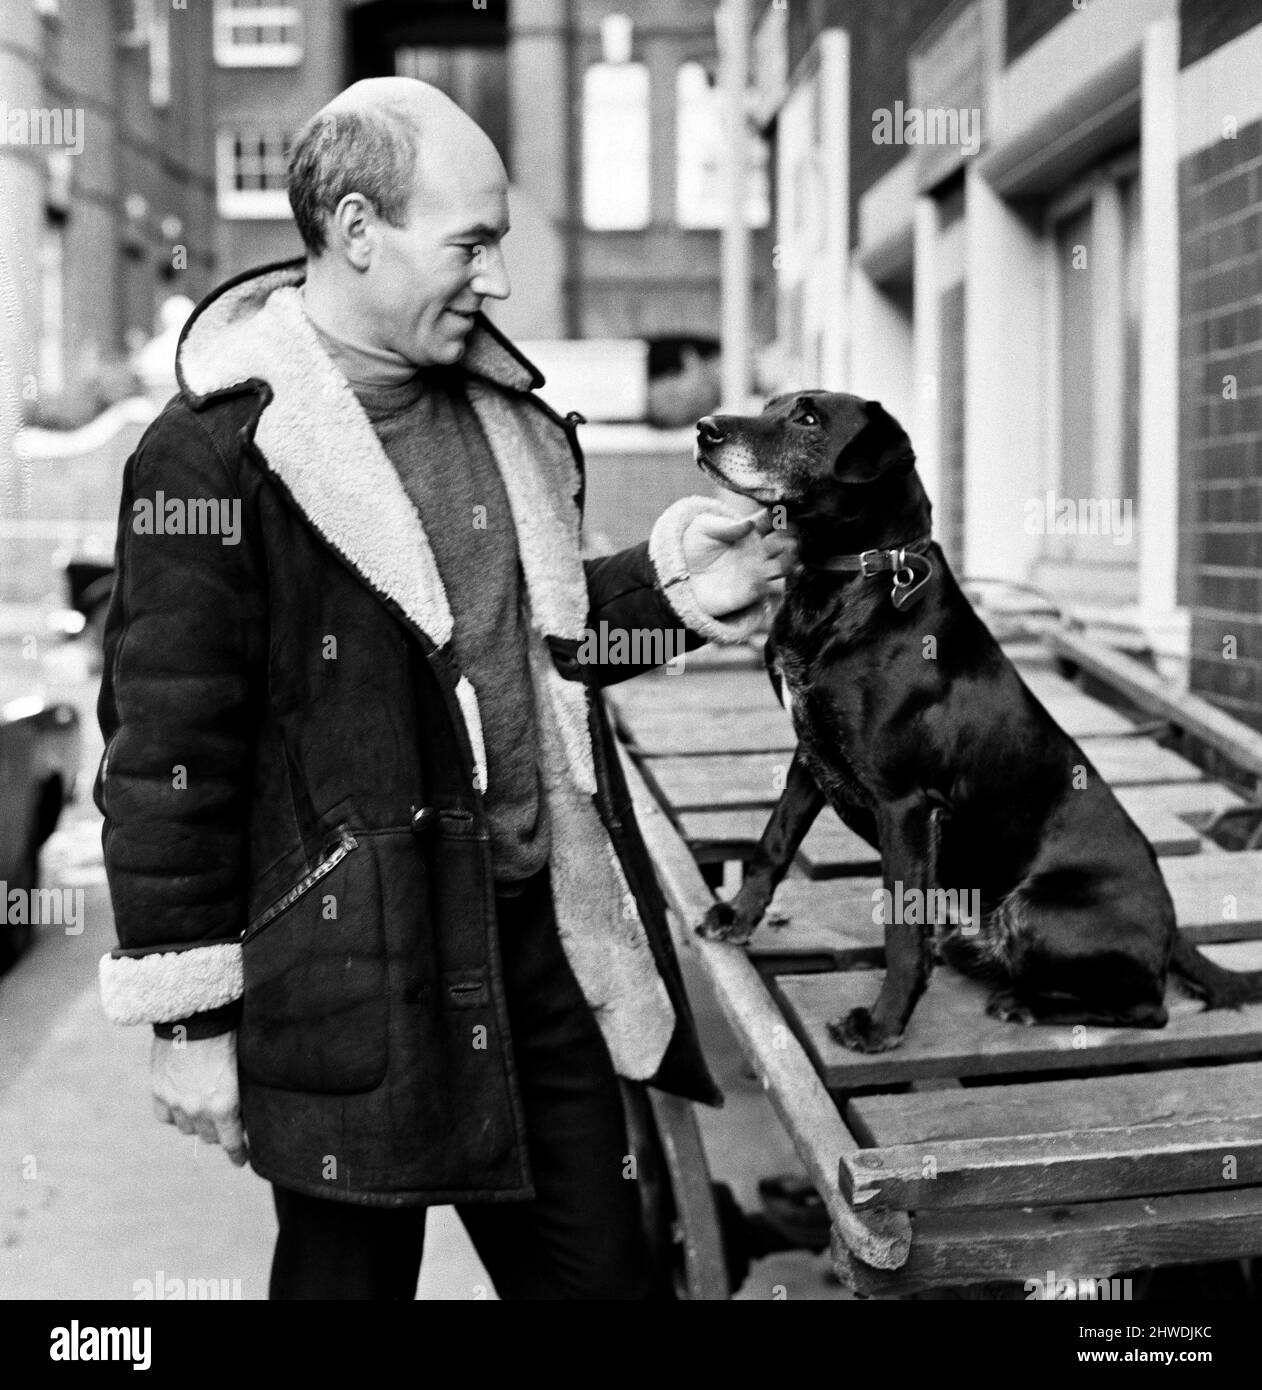 Patrick Stewart, who is starring as Launce in The Royal Shakespeare Company's production of The Two Gentlemen of Verona, with Blackie, a dog rescued in Leamington Spa by the Avon Dog Rescue Service. Blackie was immediately cast for the role of Crab, who has an important relationship in the play with Launce. 21st December 1970. Stock Photo